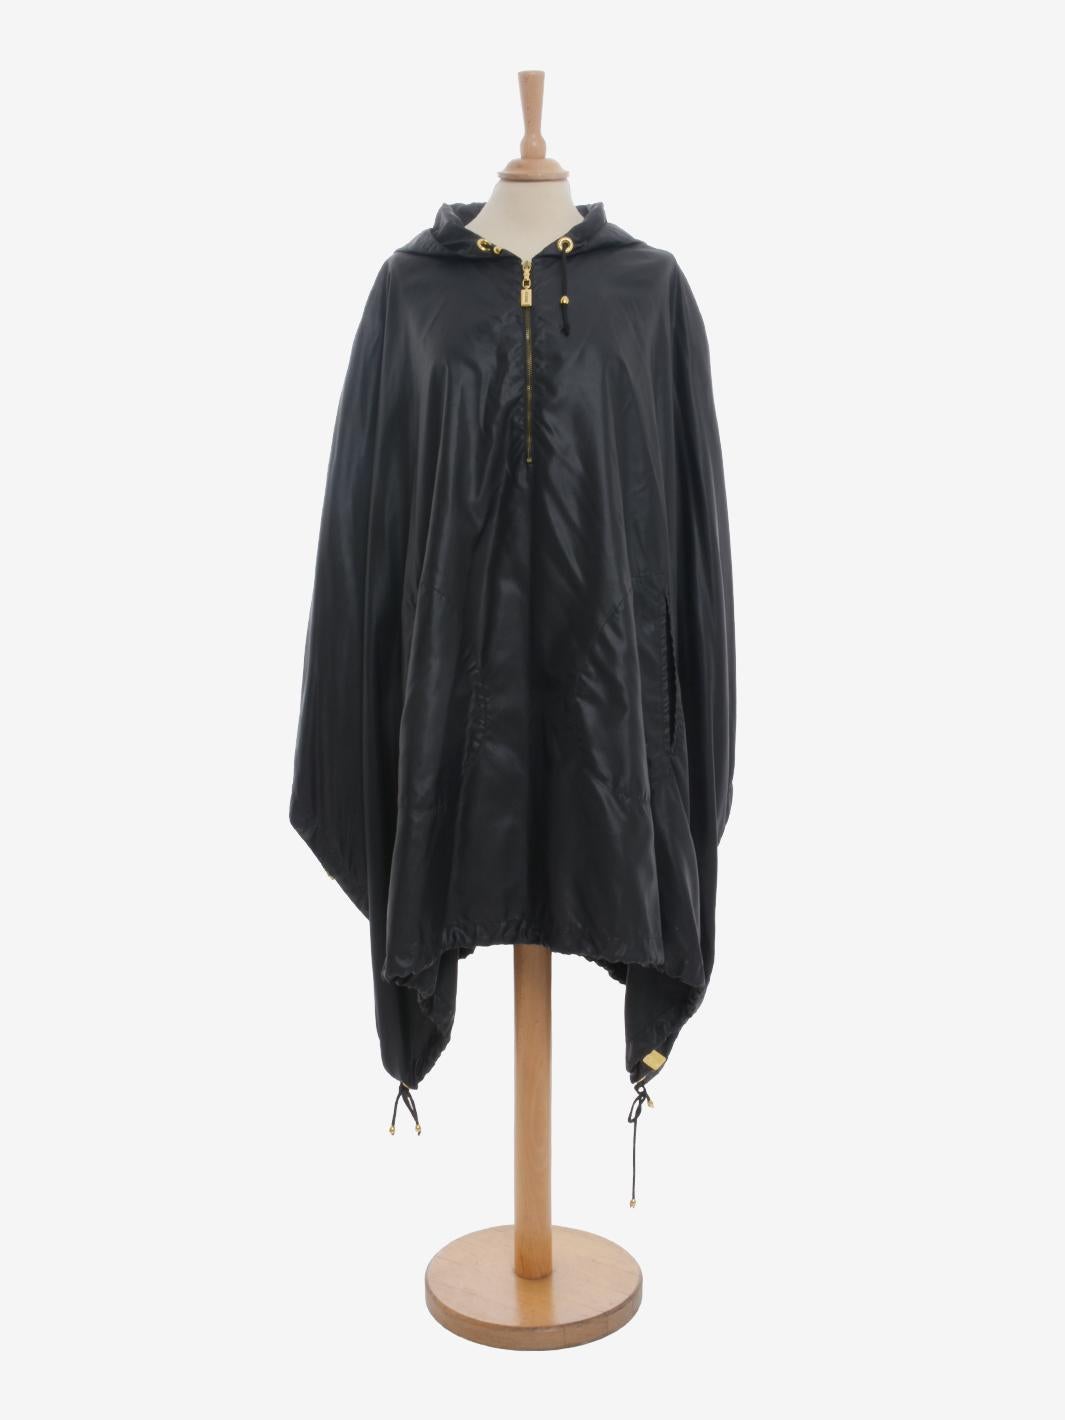 Gianfranco Ferré Raincoat is a rare outerwear from Ferré featuring a wide cape-style structure with side zipper openings and contrasting red interior piping. Each zipper and gold metallic detail is embellished with the brand's logo. Iconic garment